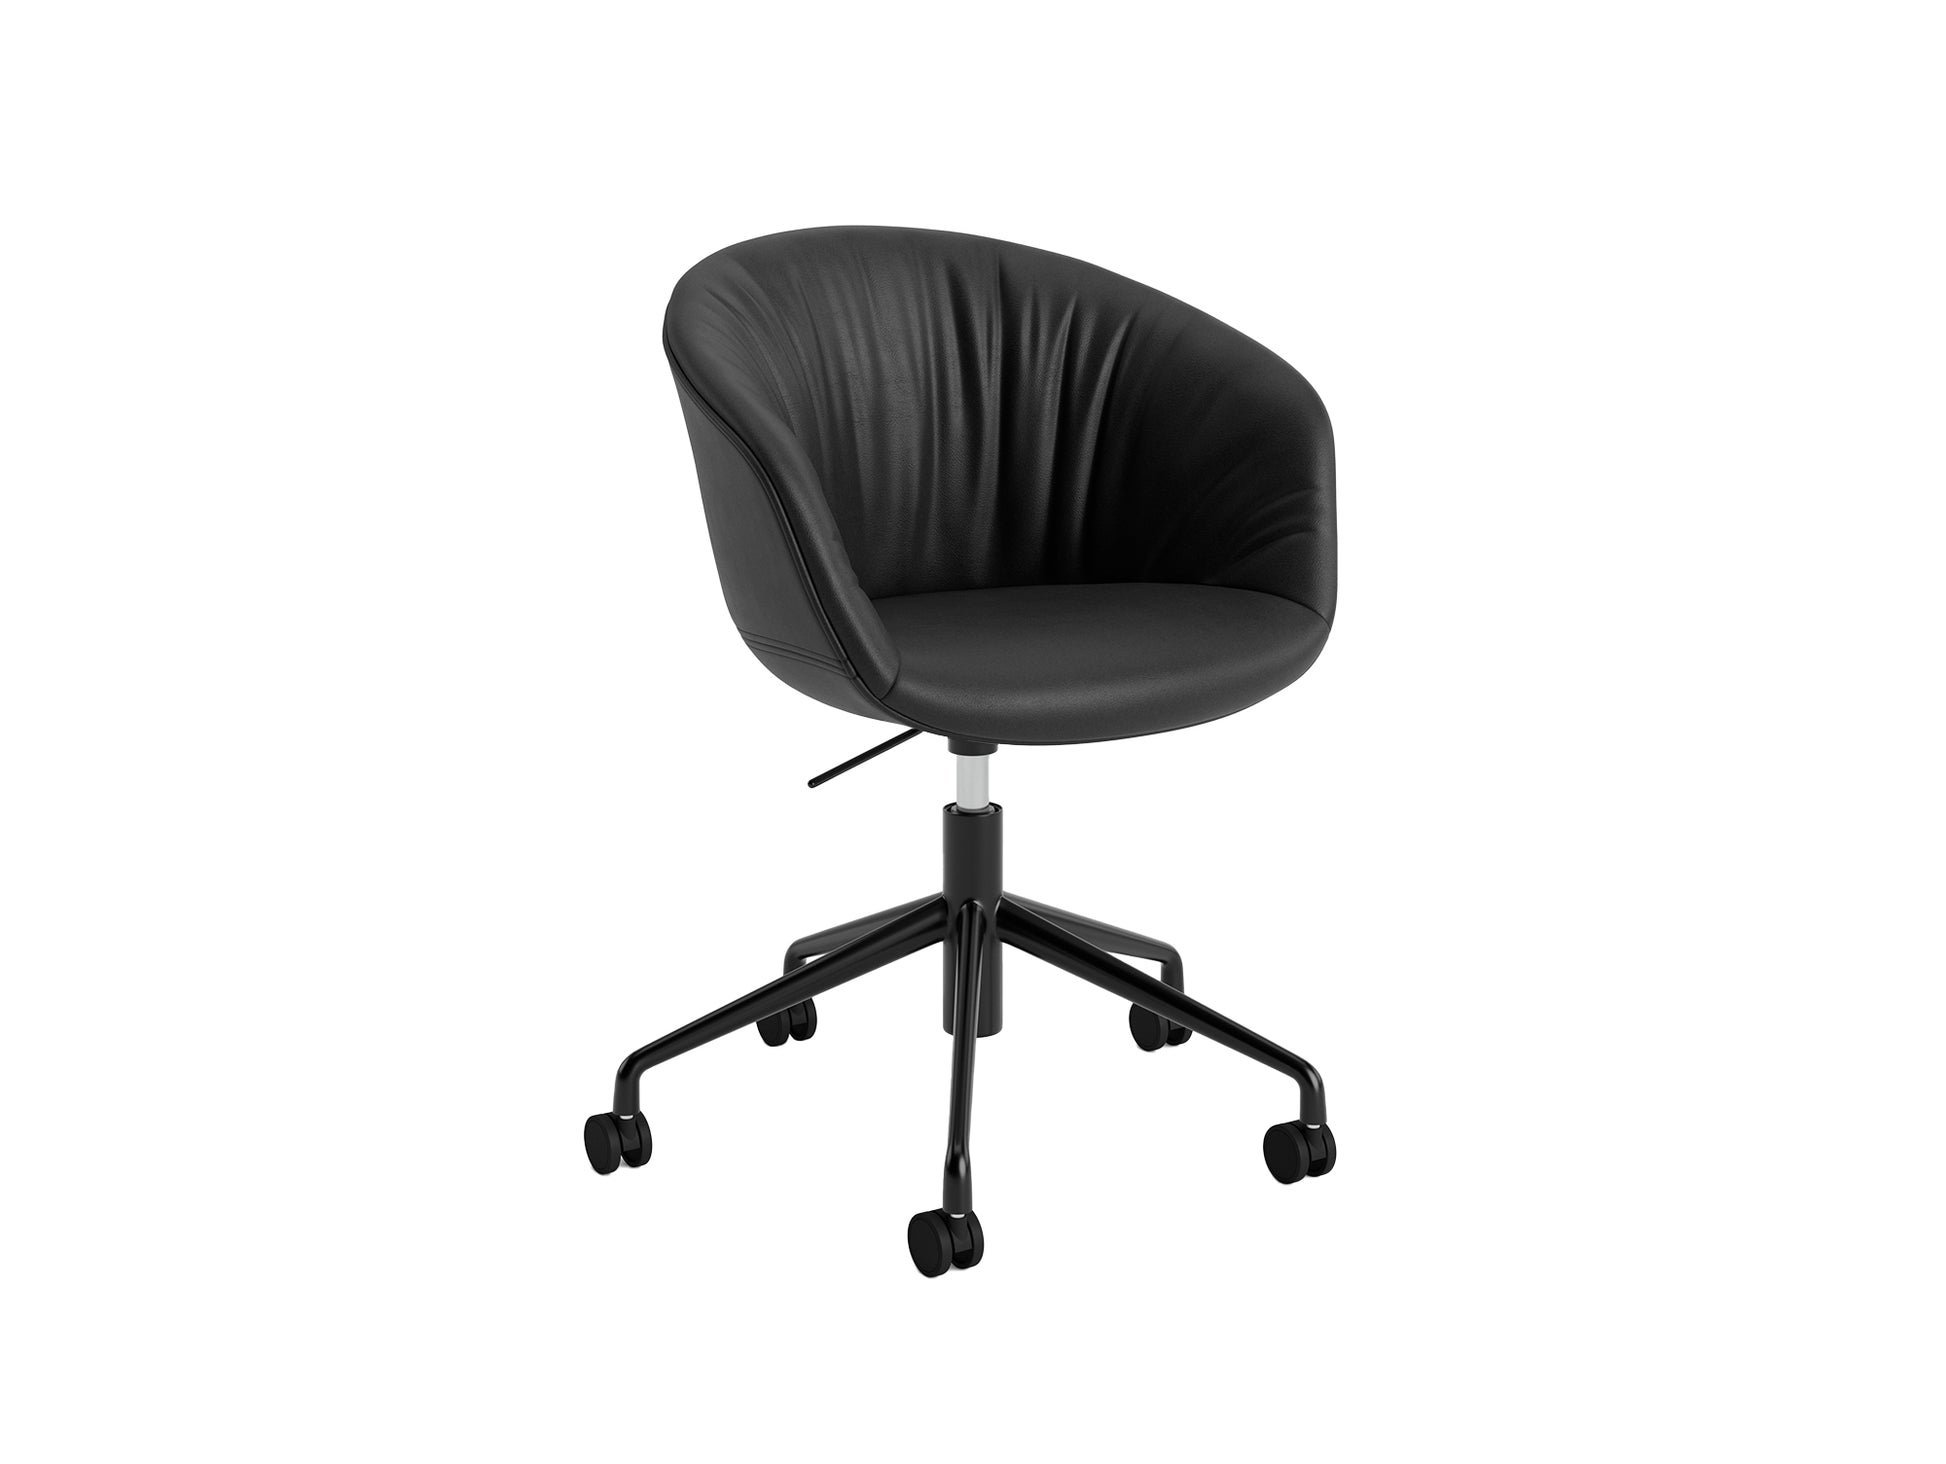 About A Chair AAC 53 Soft by HAY - Nevada 0500 / Black Powder Coated Aluminium